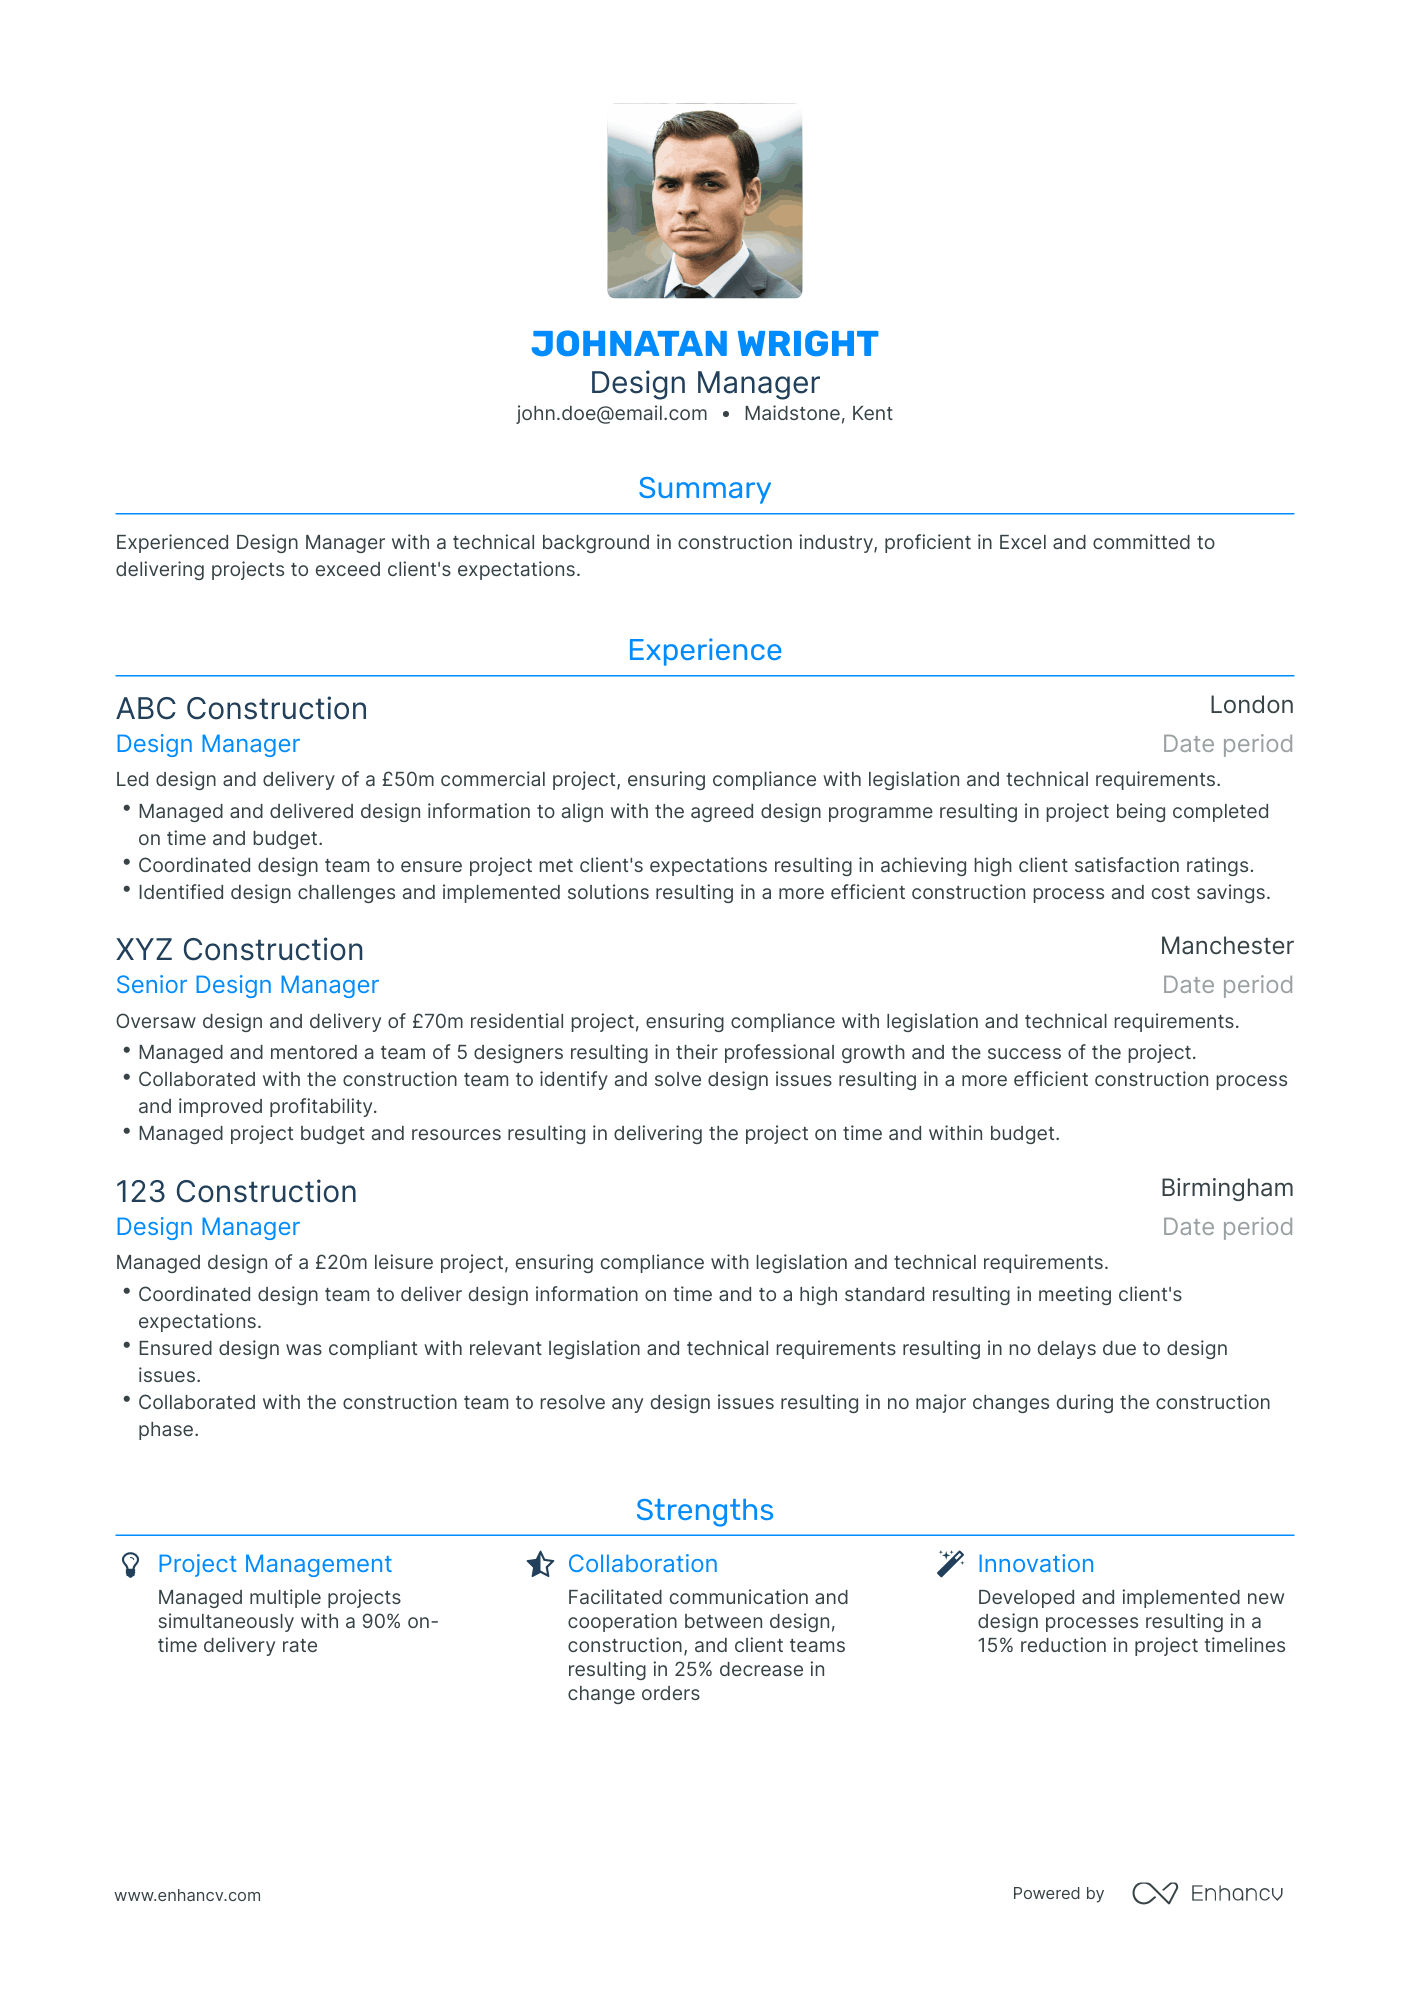 Traditional Design Manager Resume Template